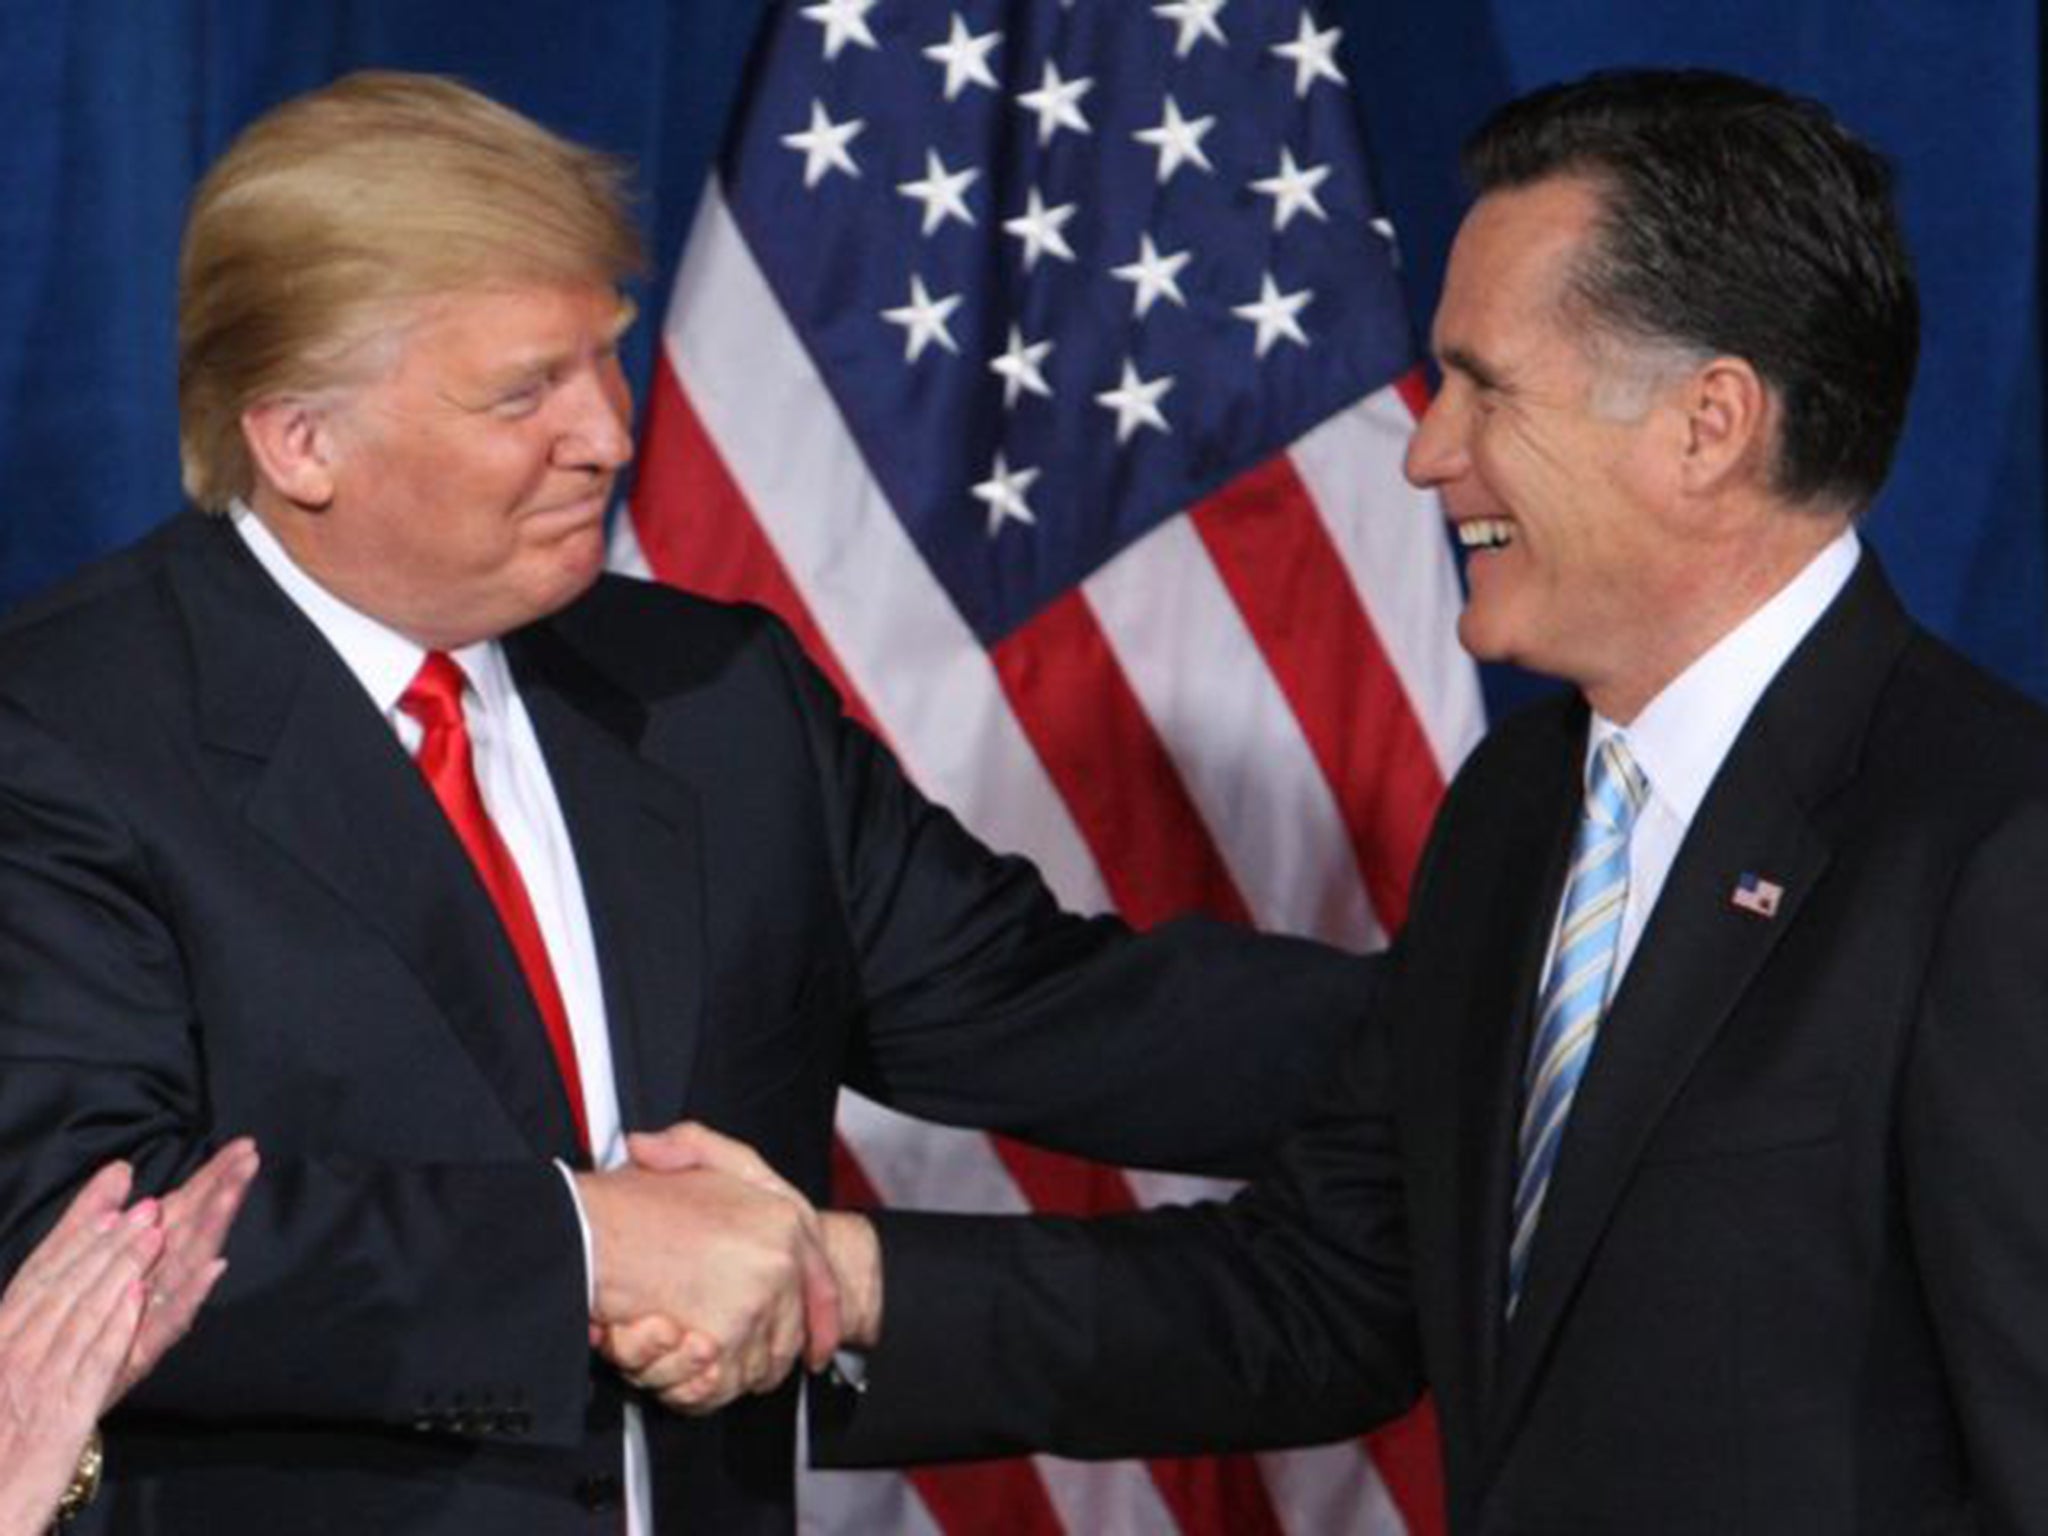 Mitt Romney shakes hands with the man he called a 'fraud' and a 'conman'